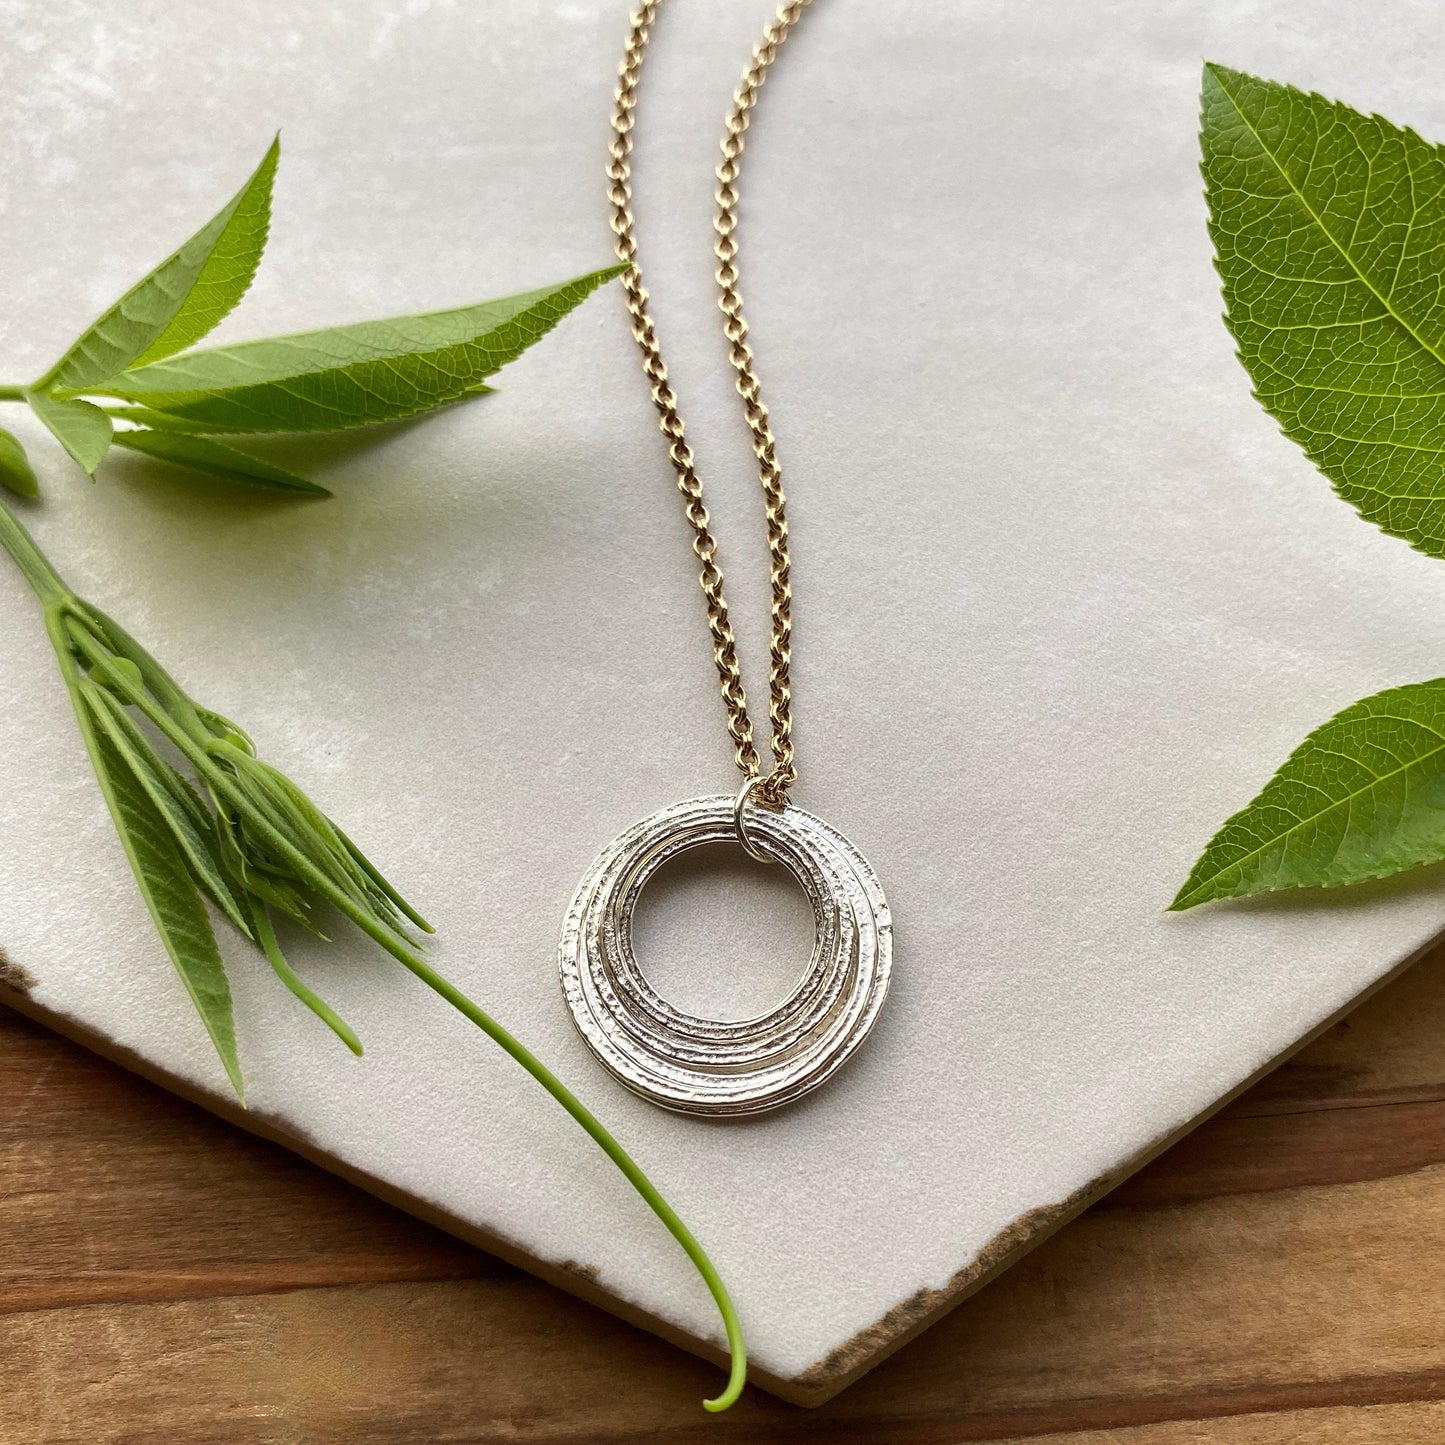 8 Circle 80th Minimalist Mixed Metal Milestone Birthday Necklace, Seven Rings for 8 Decades Handcrafted Perfectly Imperfect 8 Circle Pendant